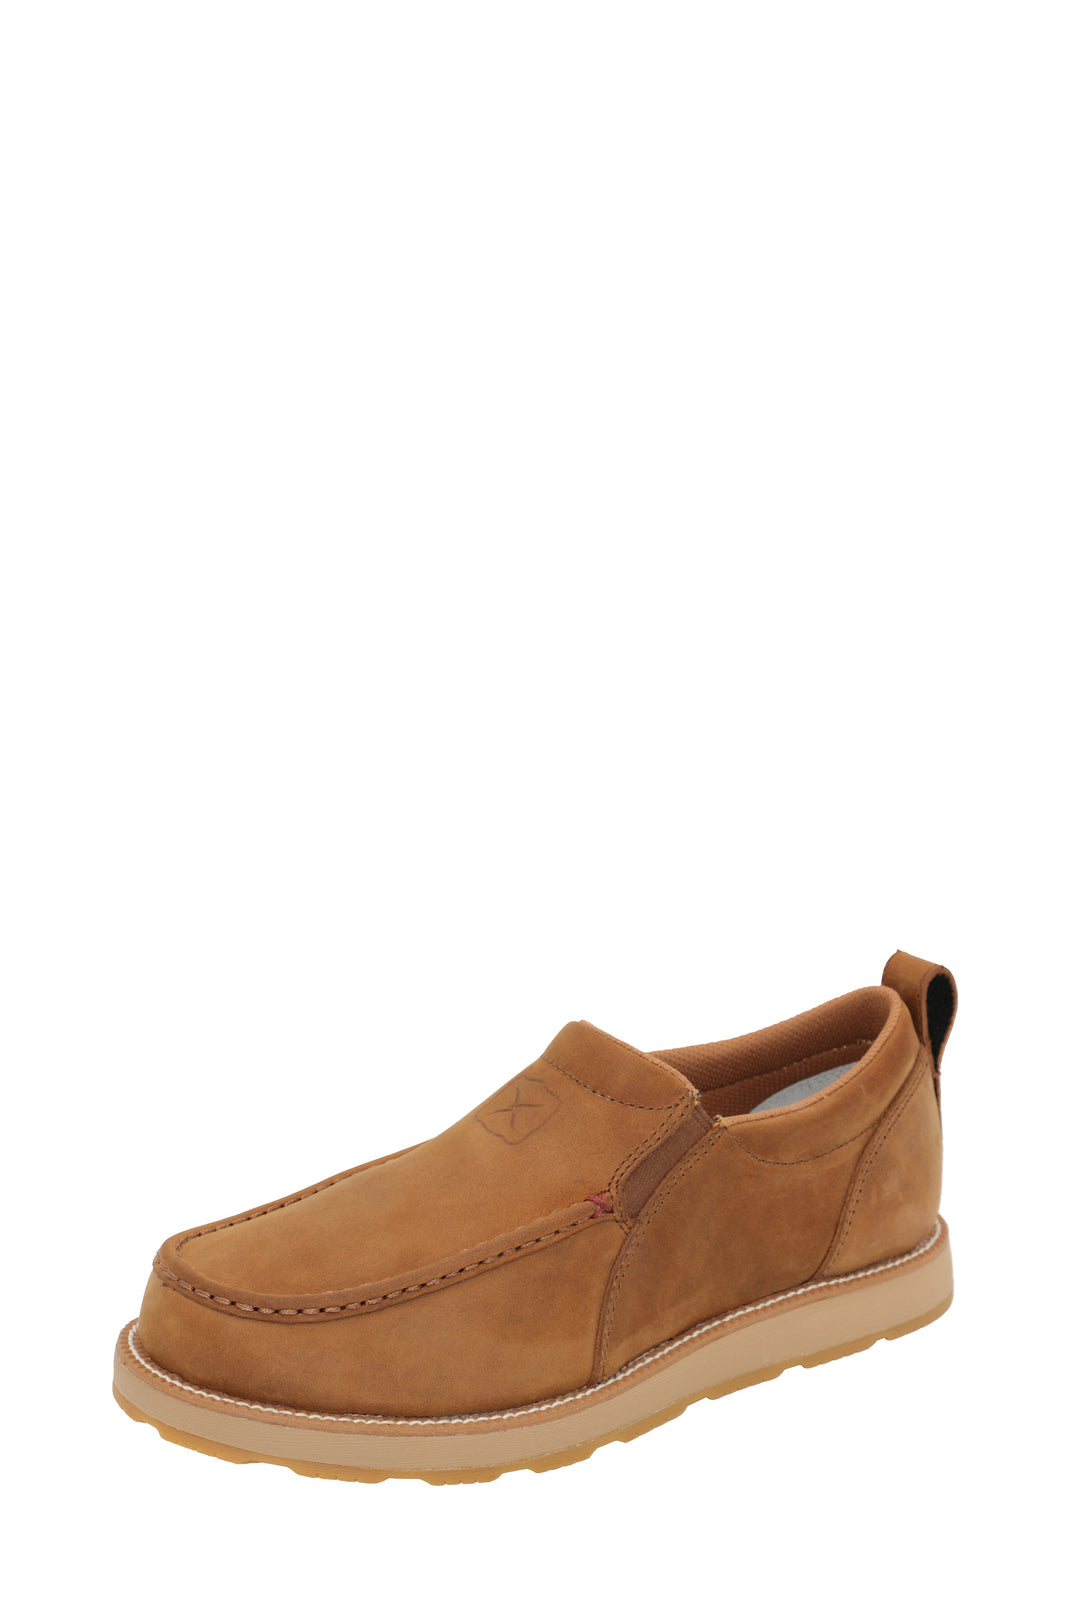 Twisted X - Mens Wedge Slip On Mocs